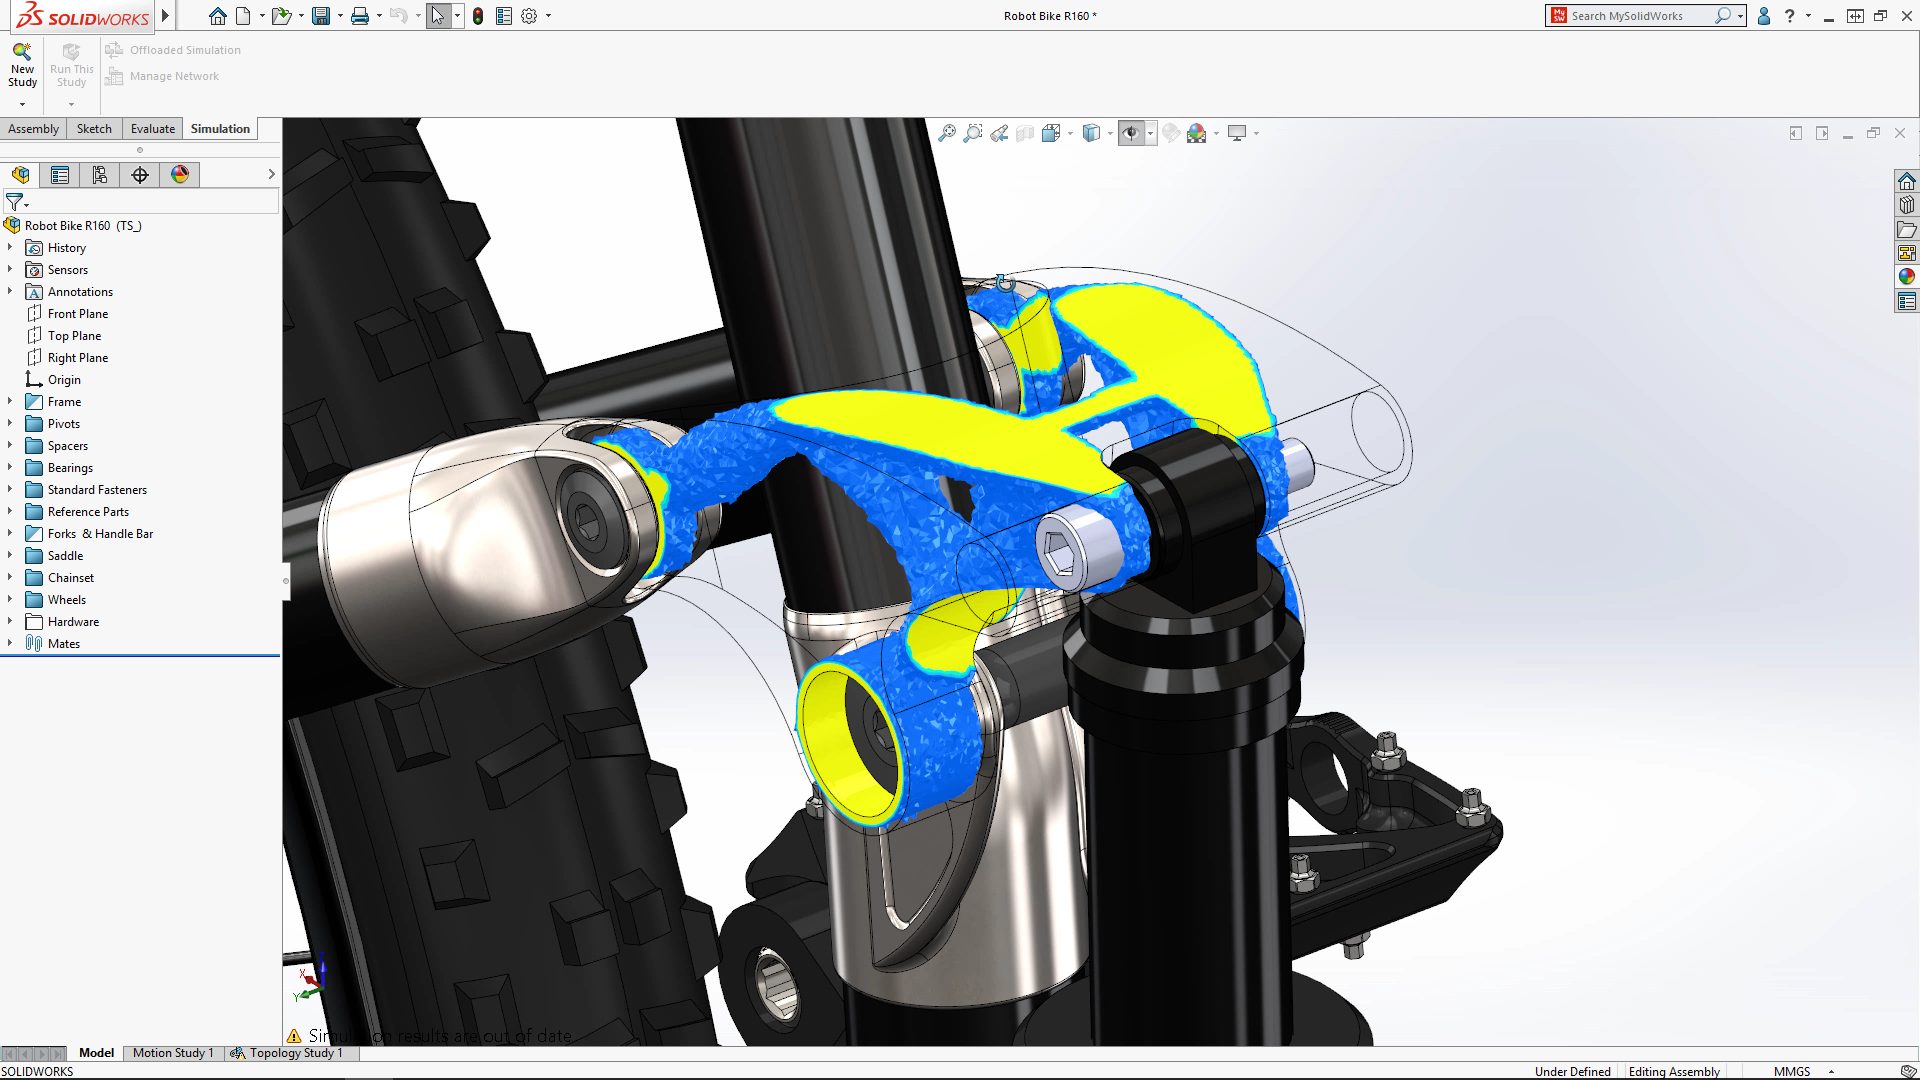 solidworks toolbox 2019 download